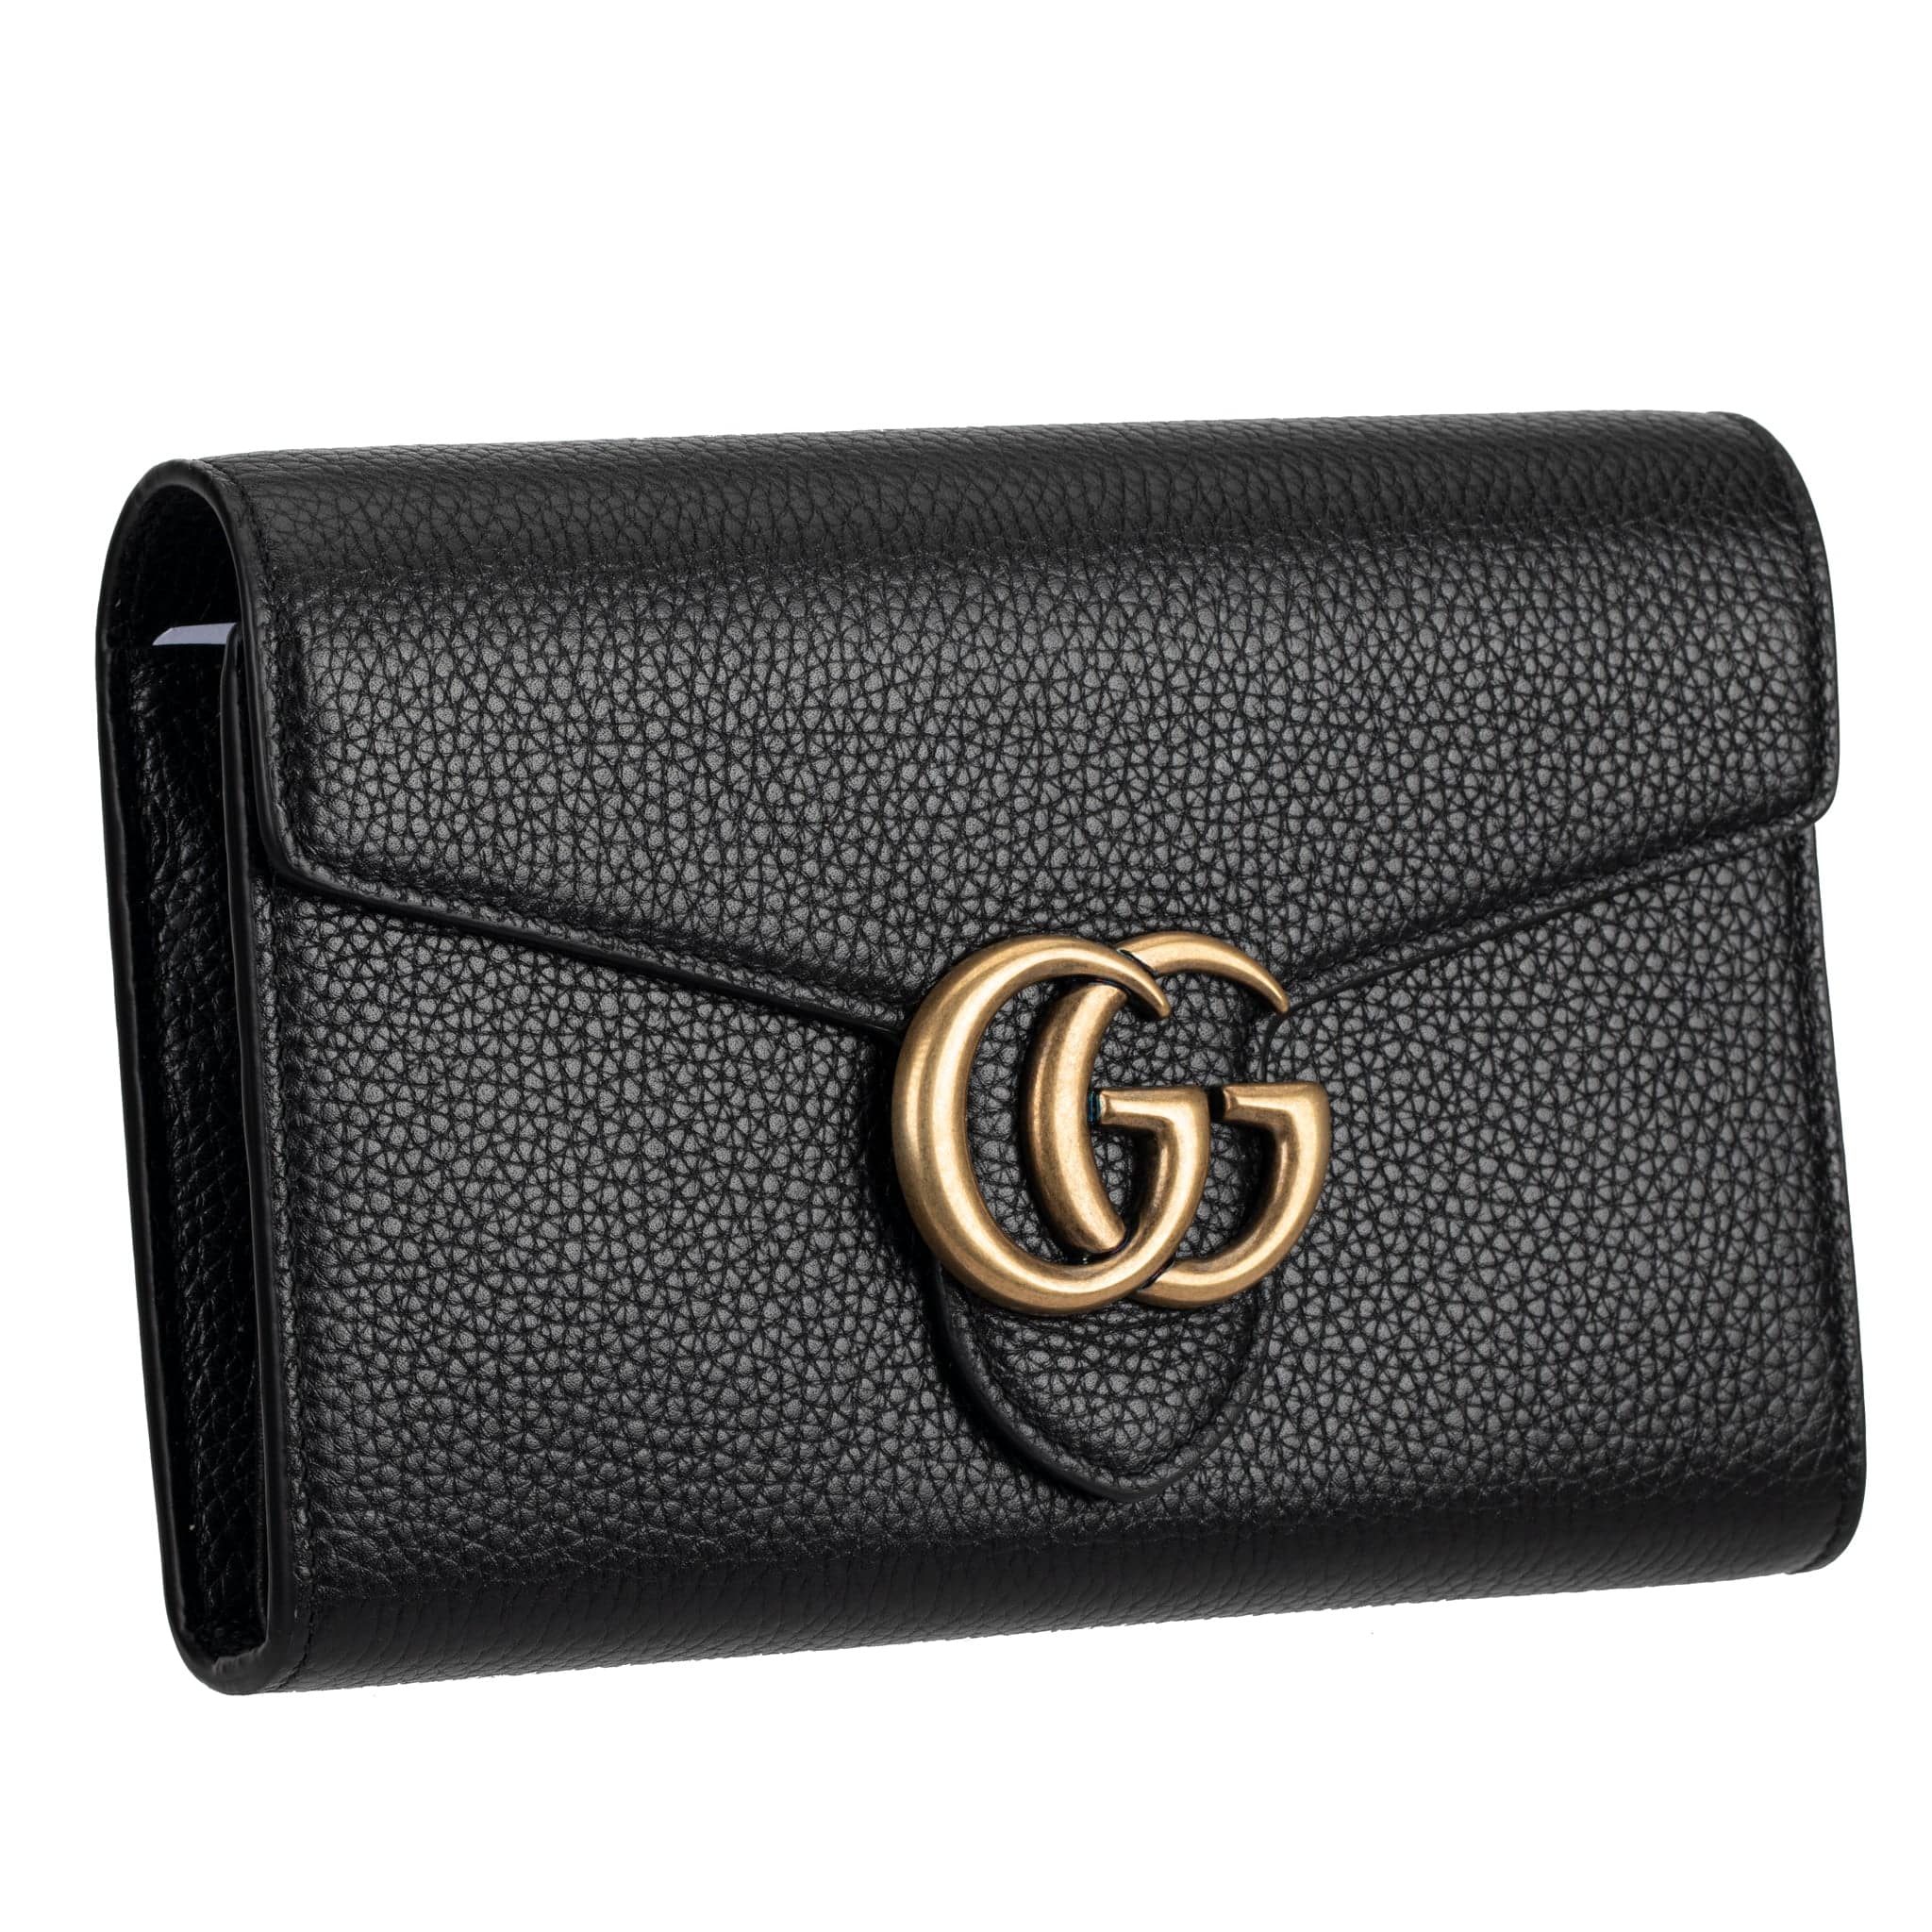 GUCCI MARMONT WALLET ON CHAIN BLACK PEBBLED LEATHER AGED GOLD HARDWARE - On Repeat